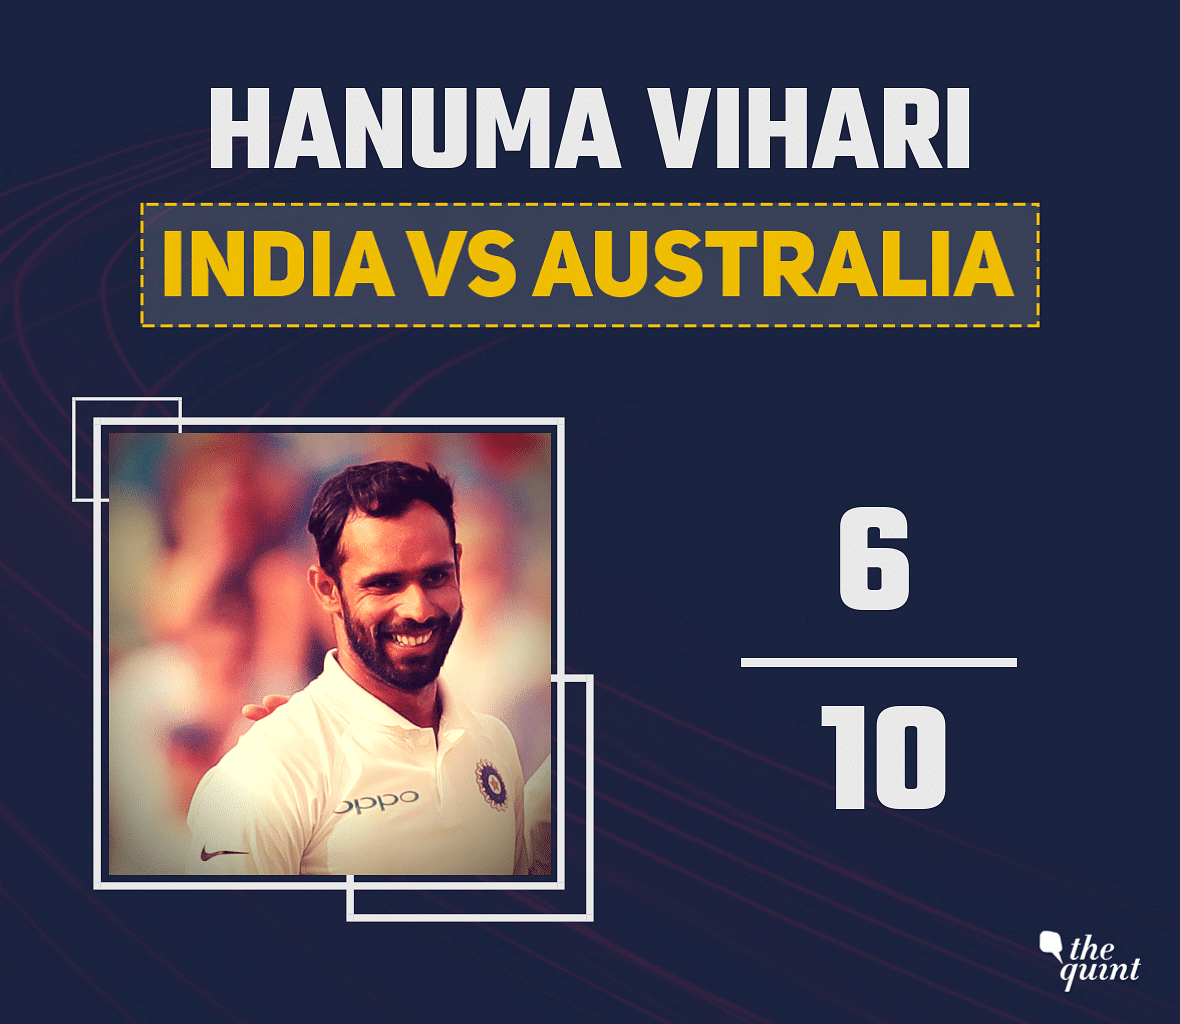 A report card of the Indian team members who won a historic first-ever Test series in Australia.